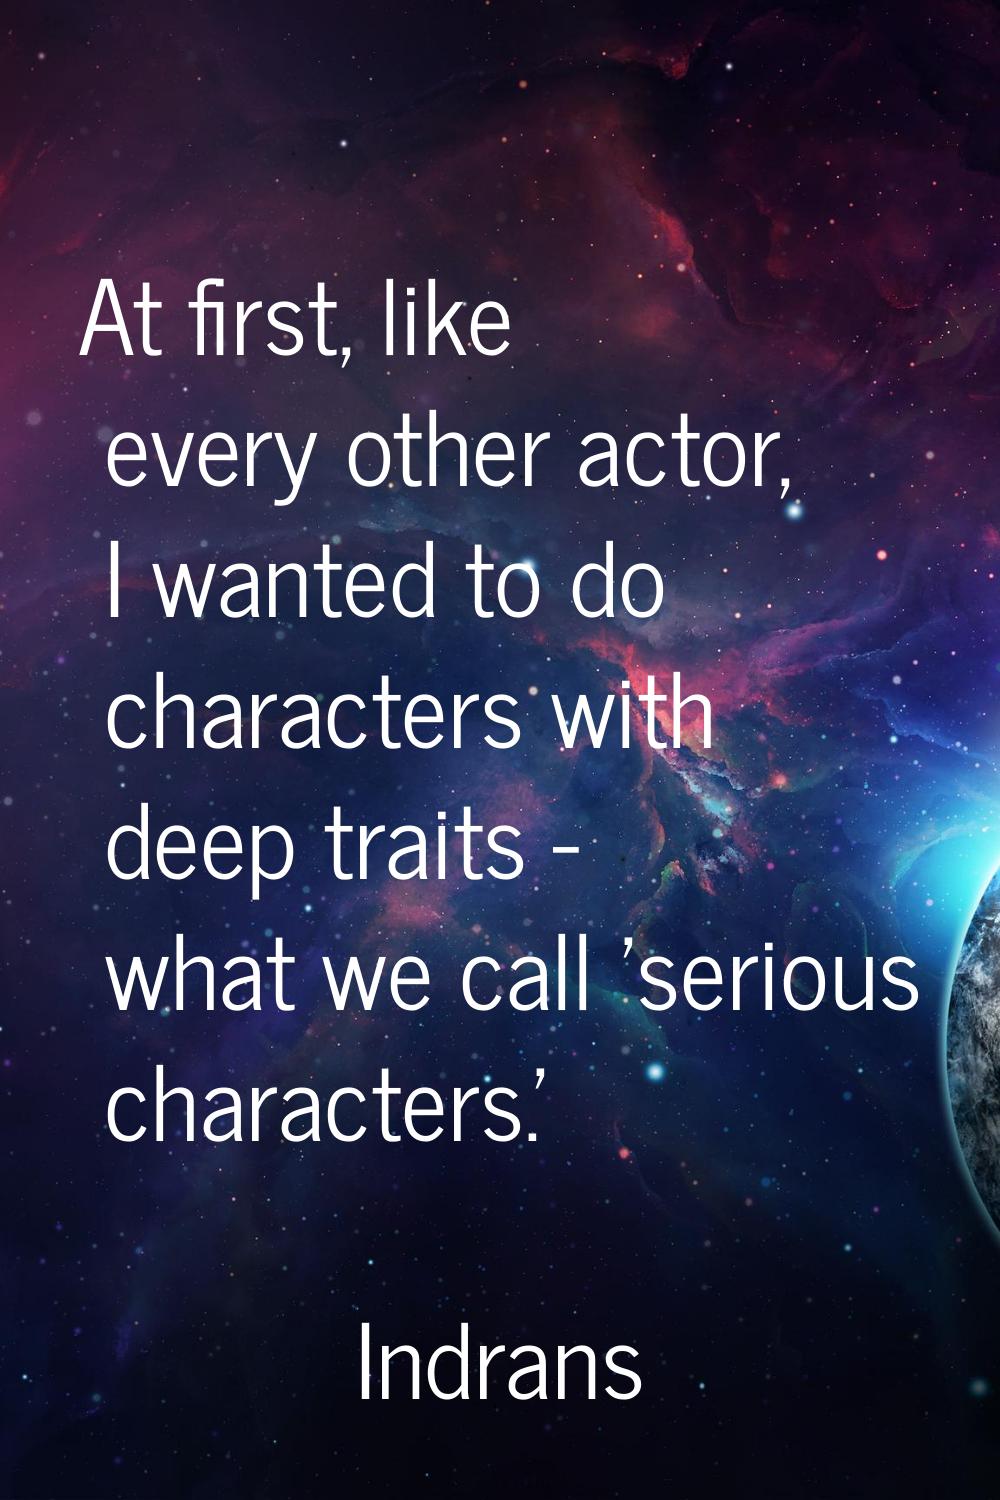 At first, like every other actor, I wanted to do characters with deep traits - what we call 'seriou